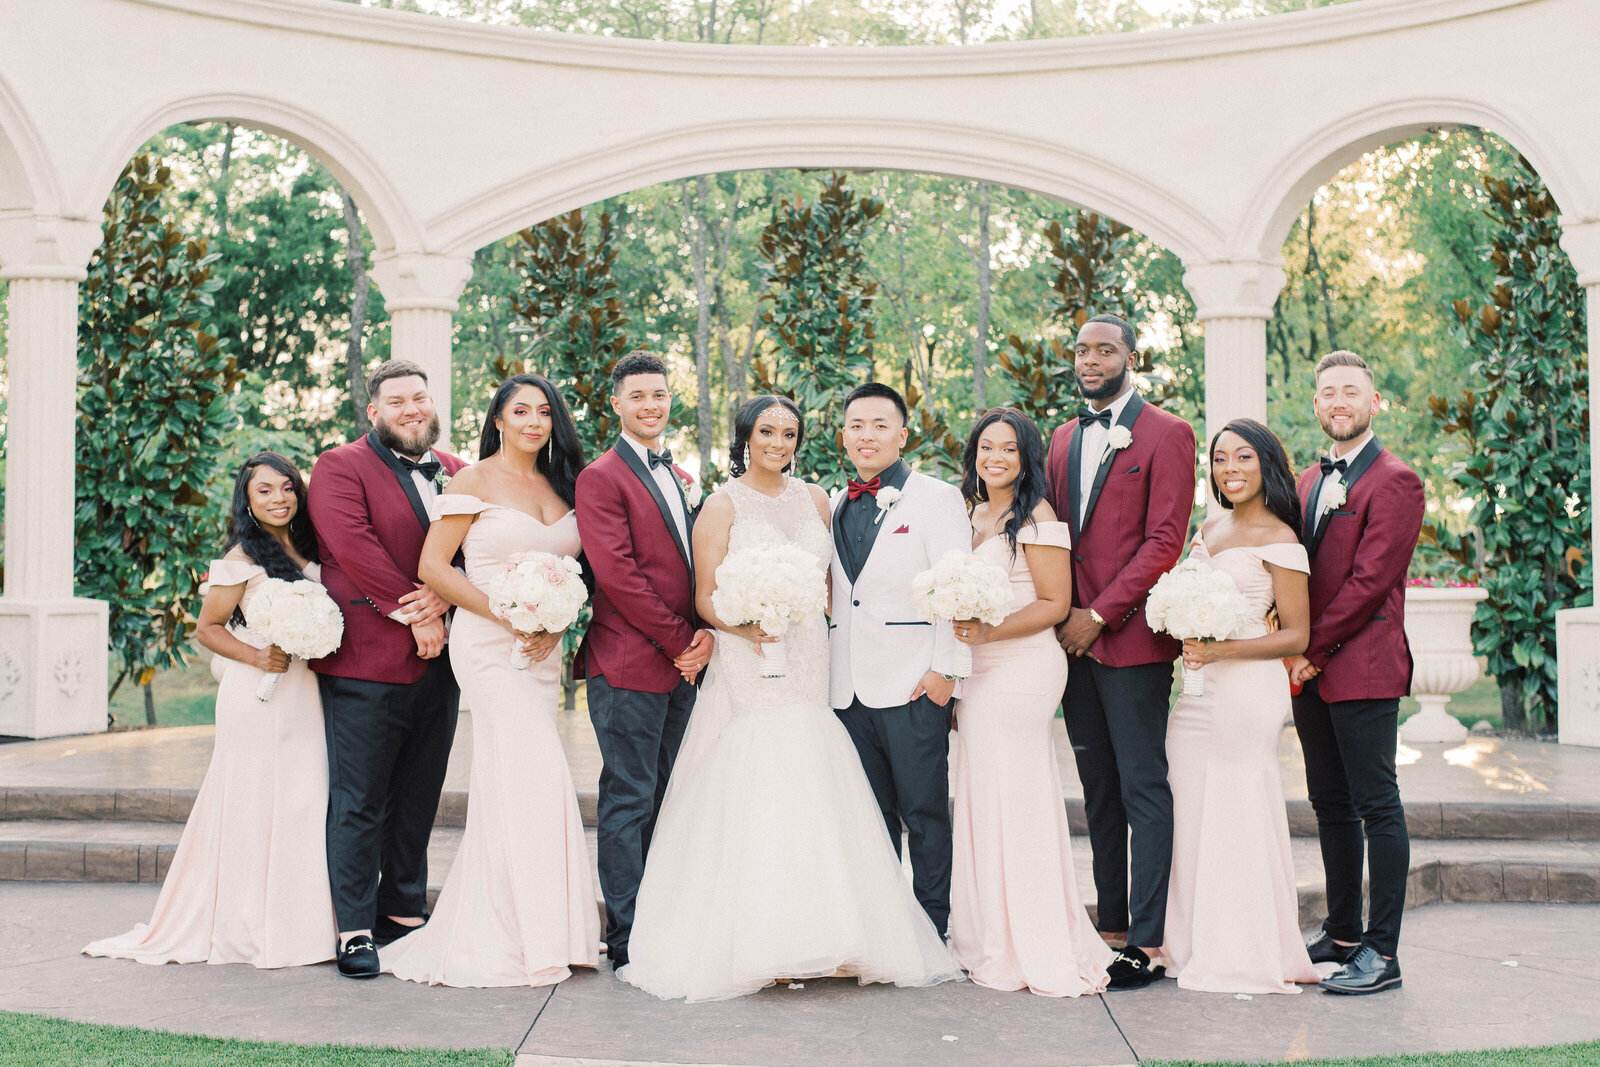 Bride and groom smiling and standing with the wedding party bridesmaids in light pink dresses and groomsmen in deep red suits